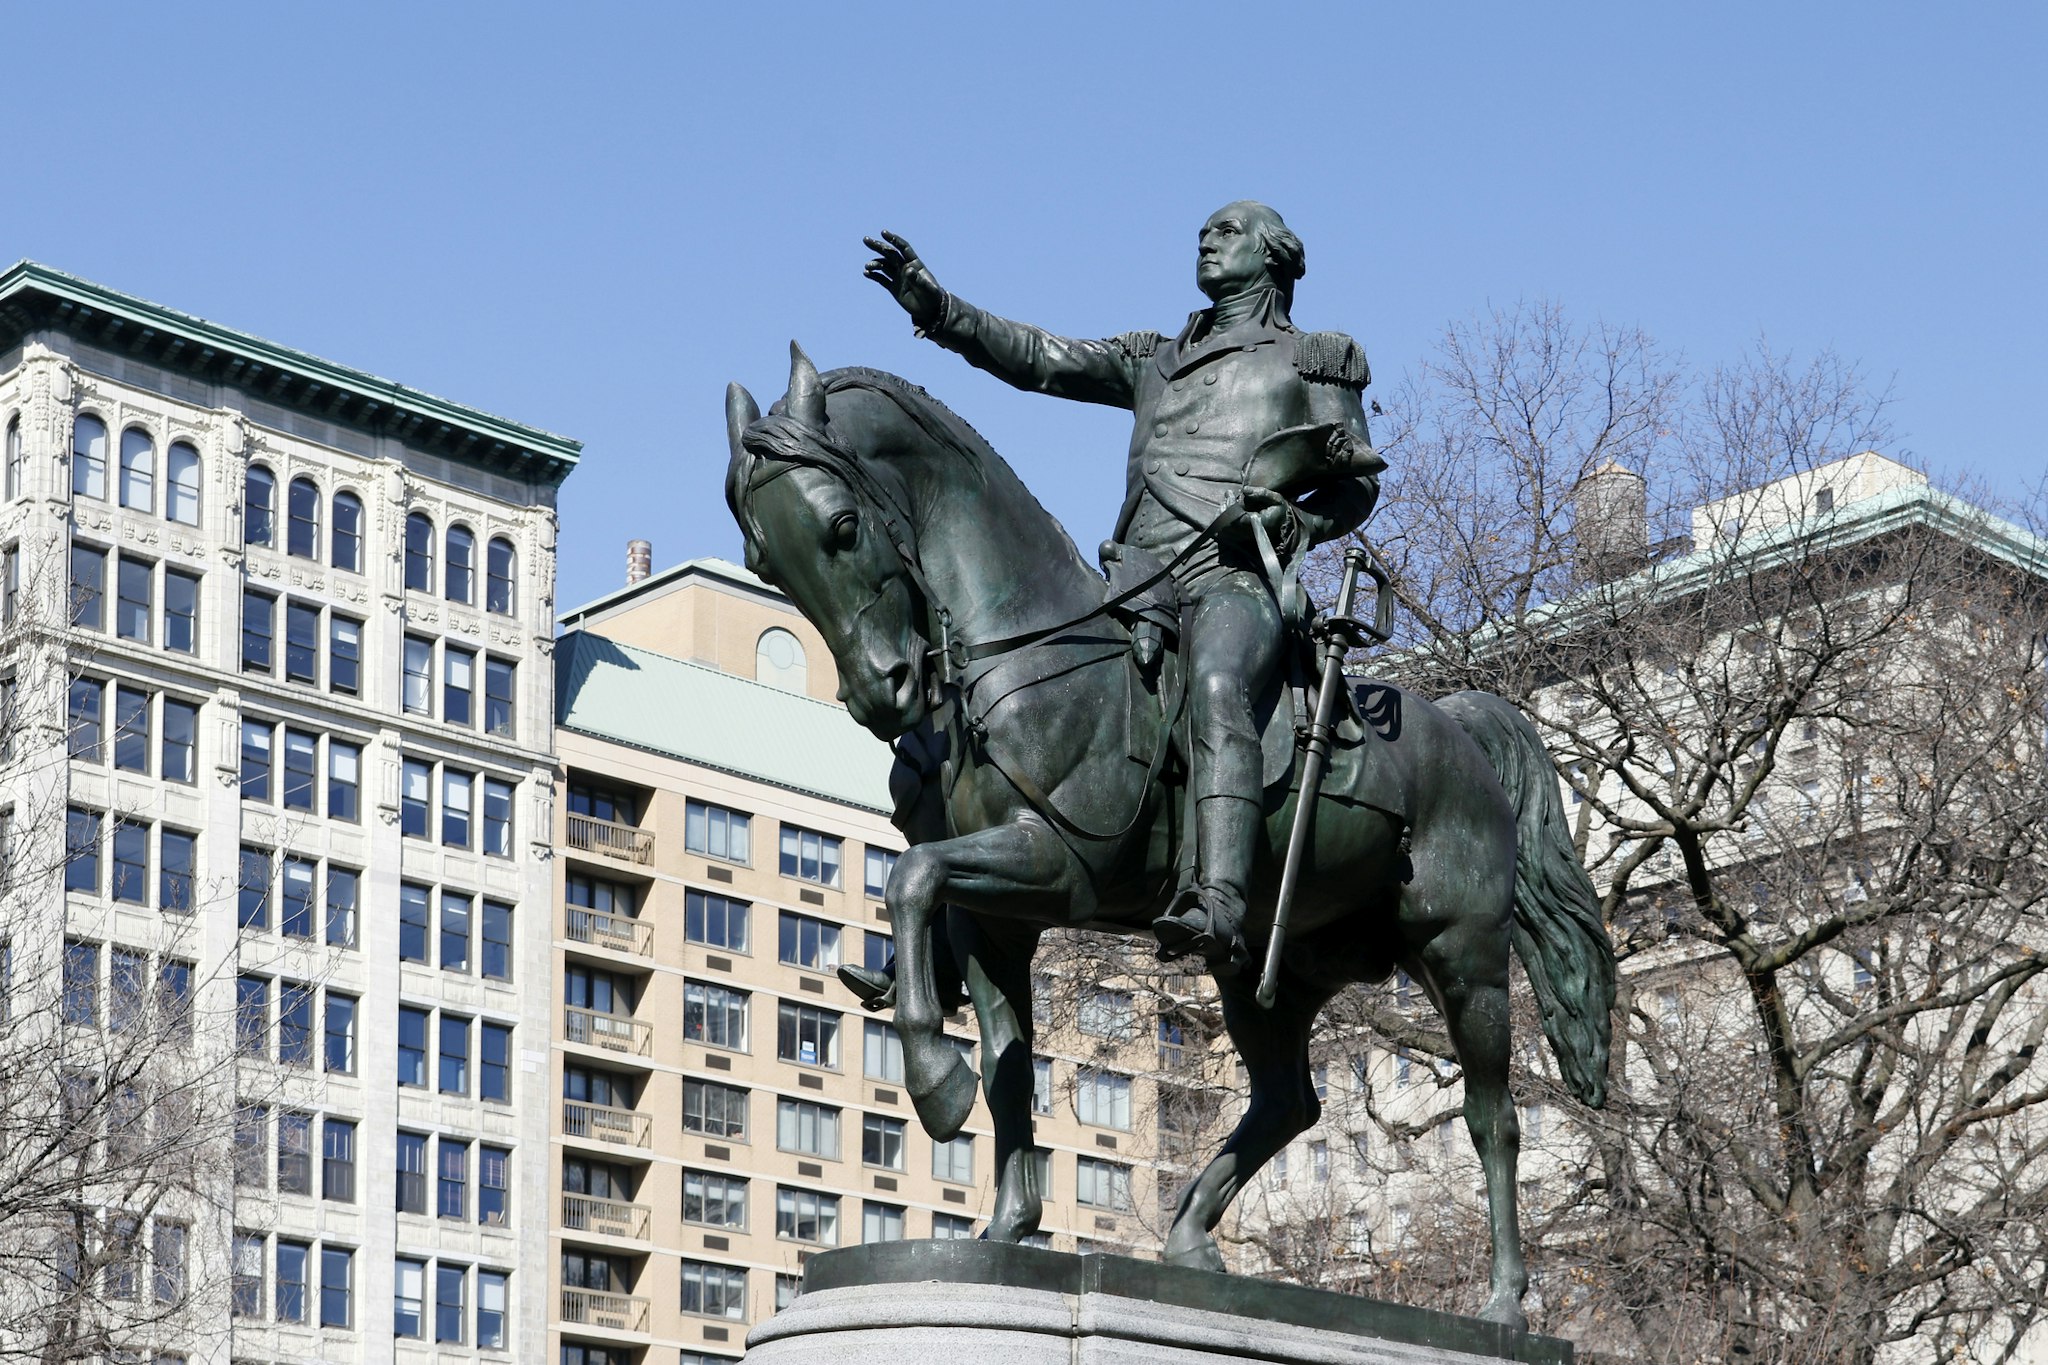 USA. New York city. Manhattan. Union Square Park. Close up on the statue of George Washington, bronze equestrian protrait, by Henry Kirke Brown (1814-1886).